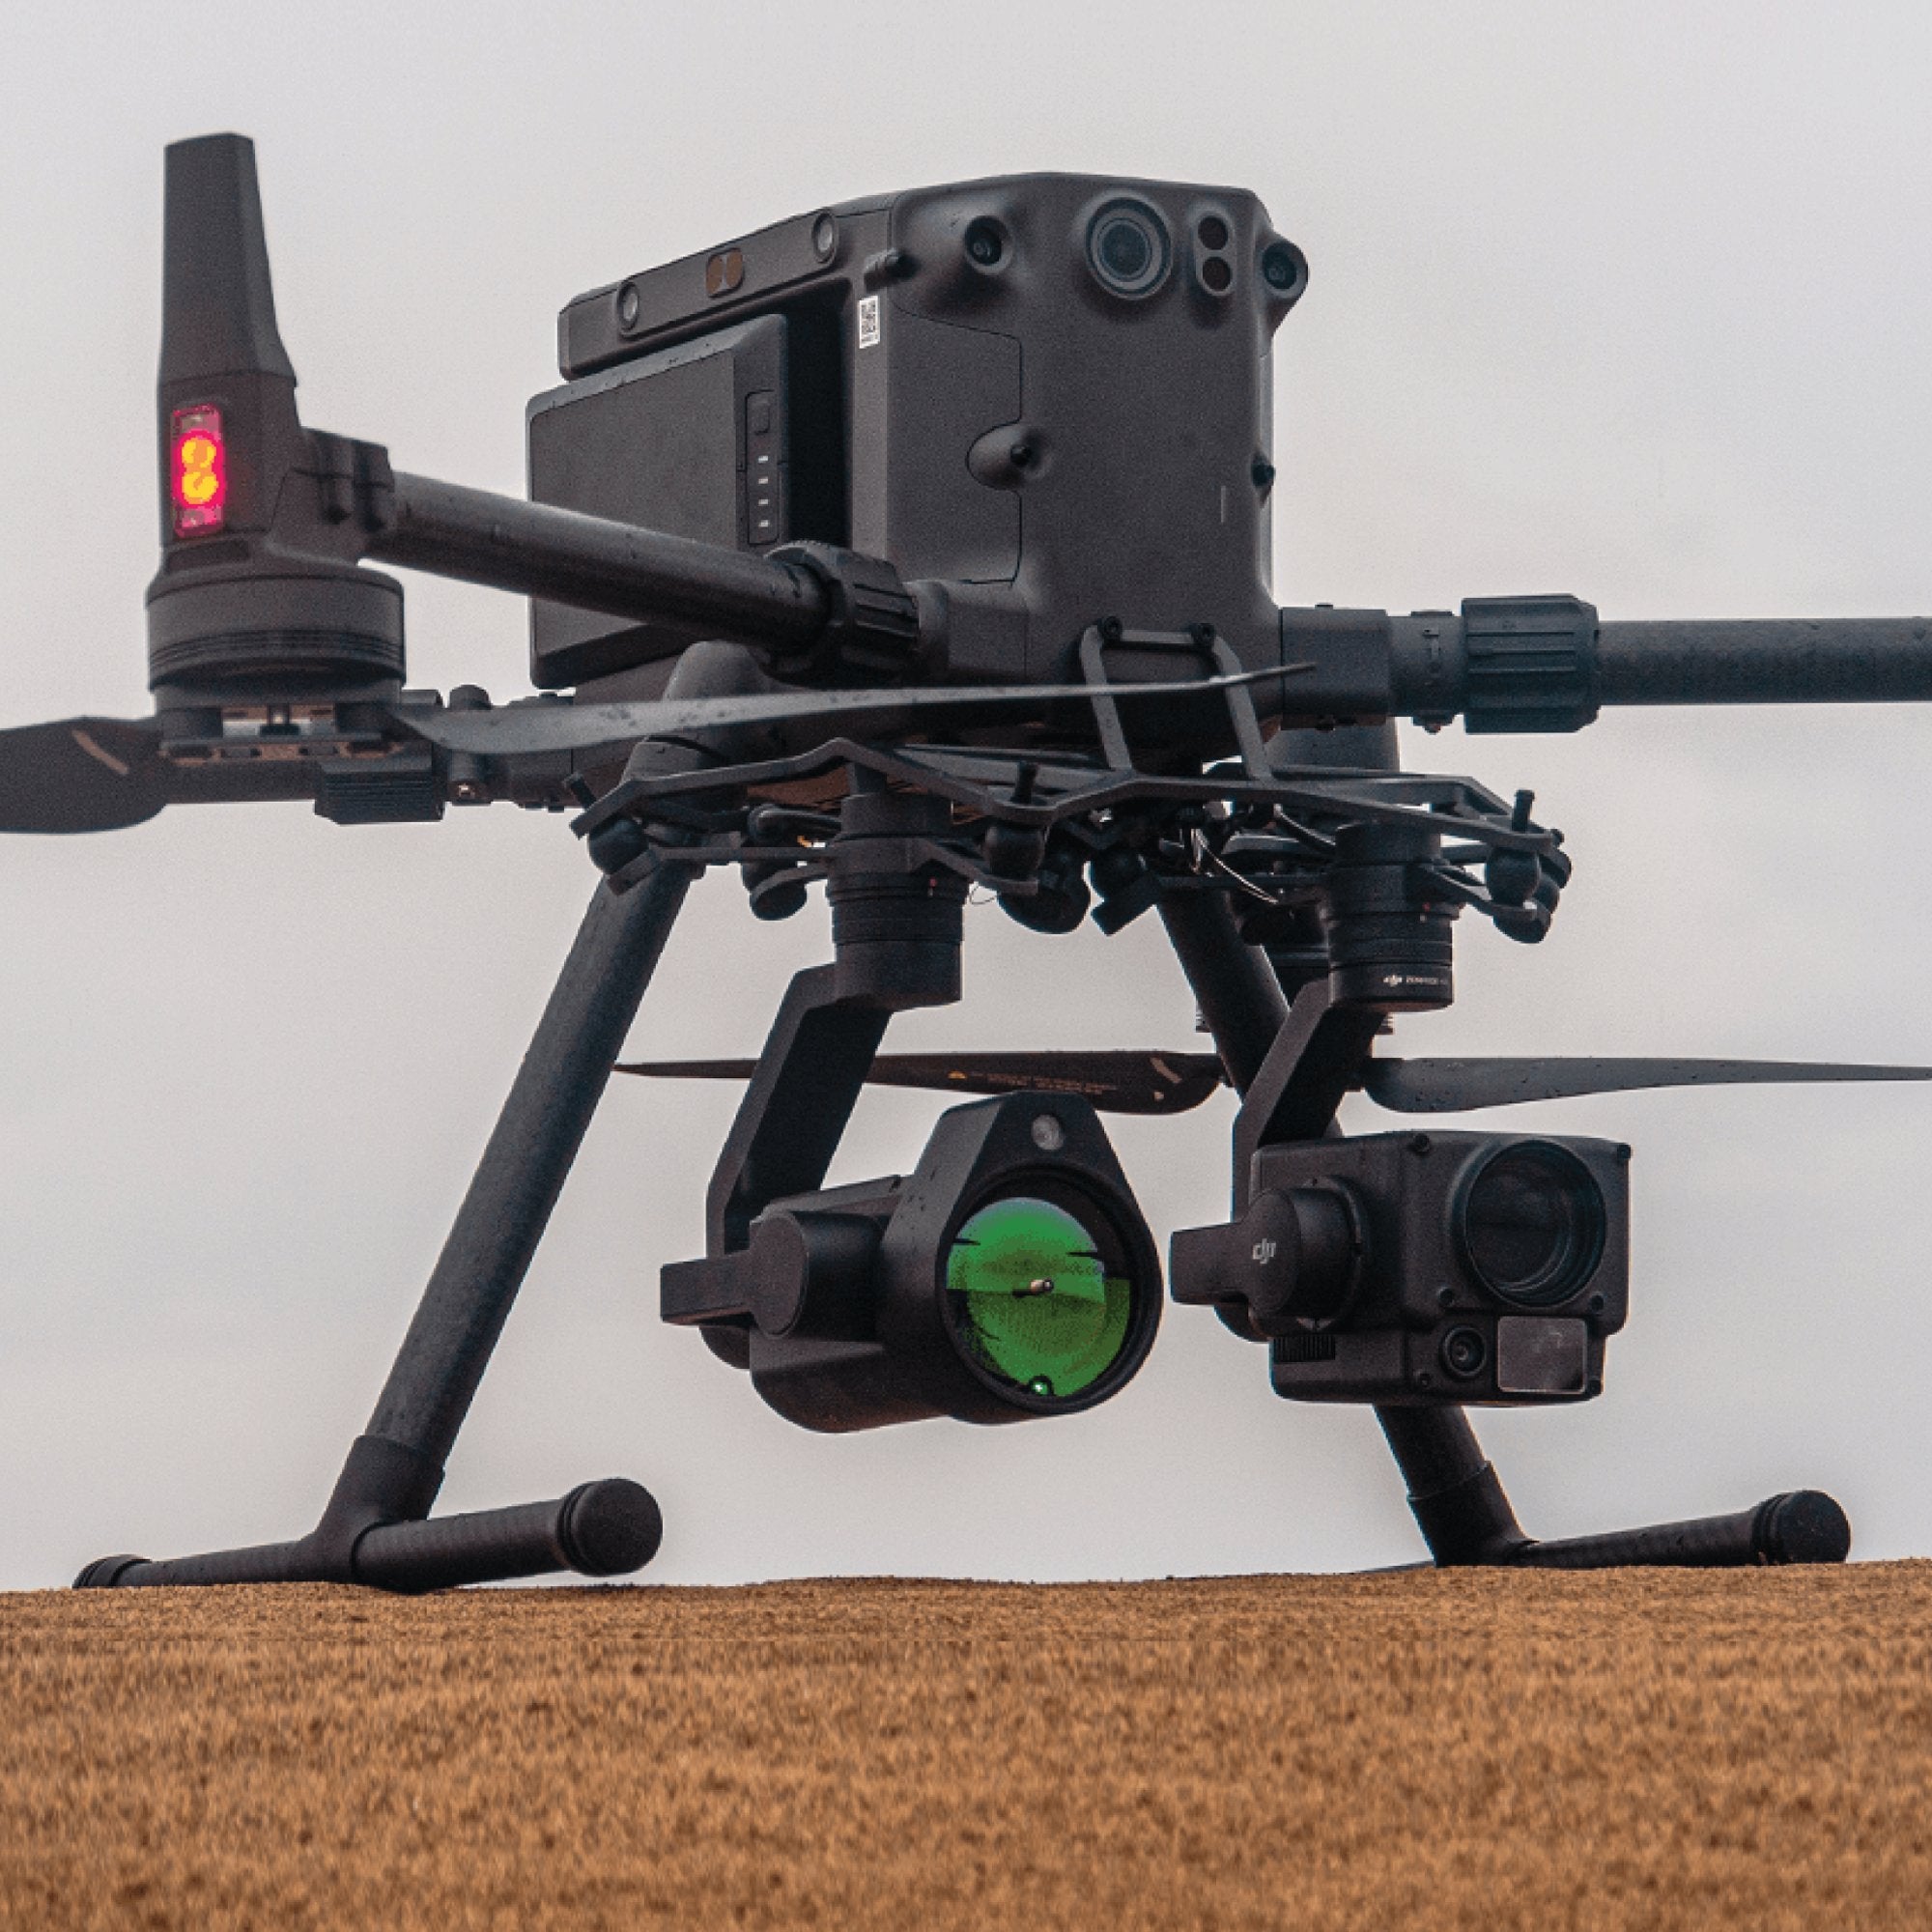 Taking Flight: Gas Detection Methods and Sensors for Drones - iRed Limited